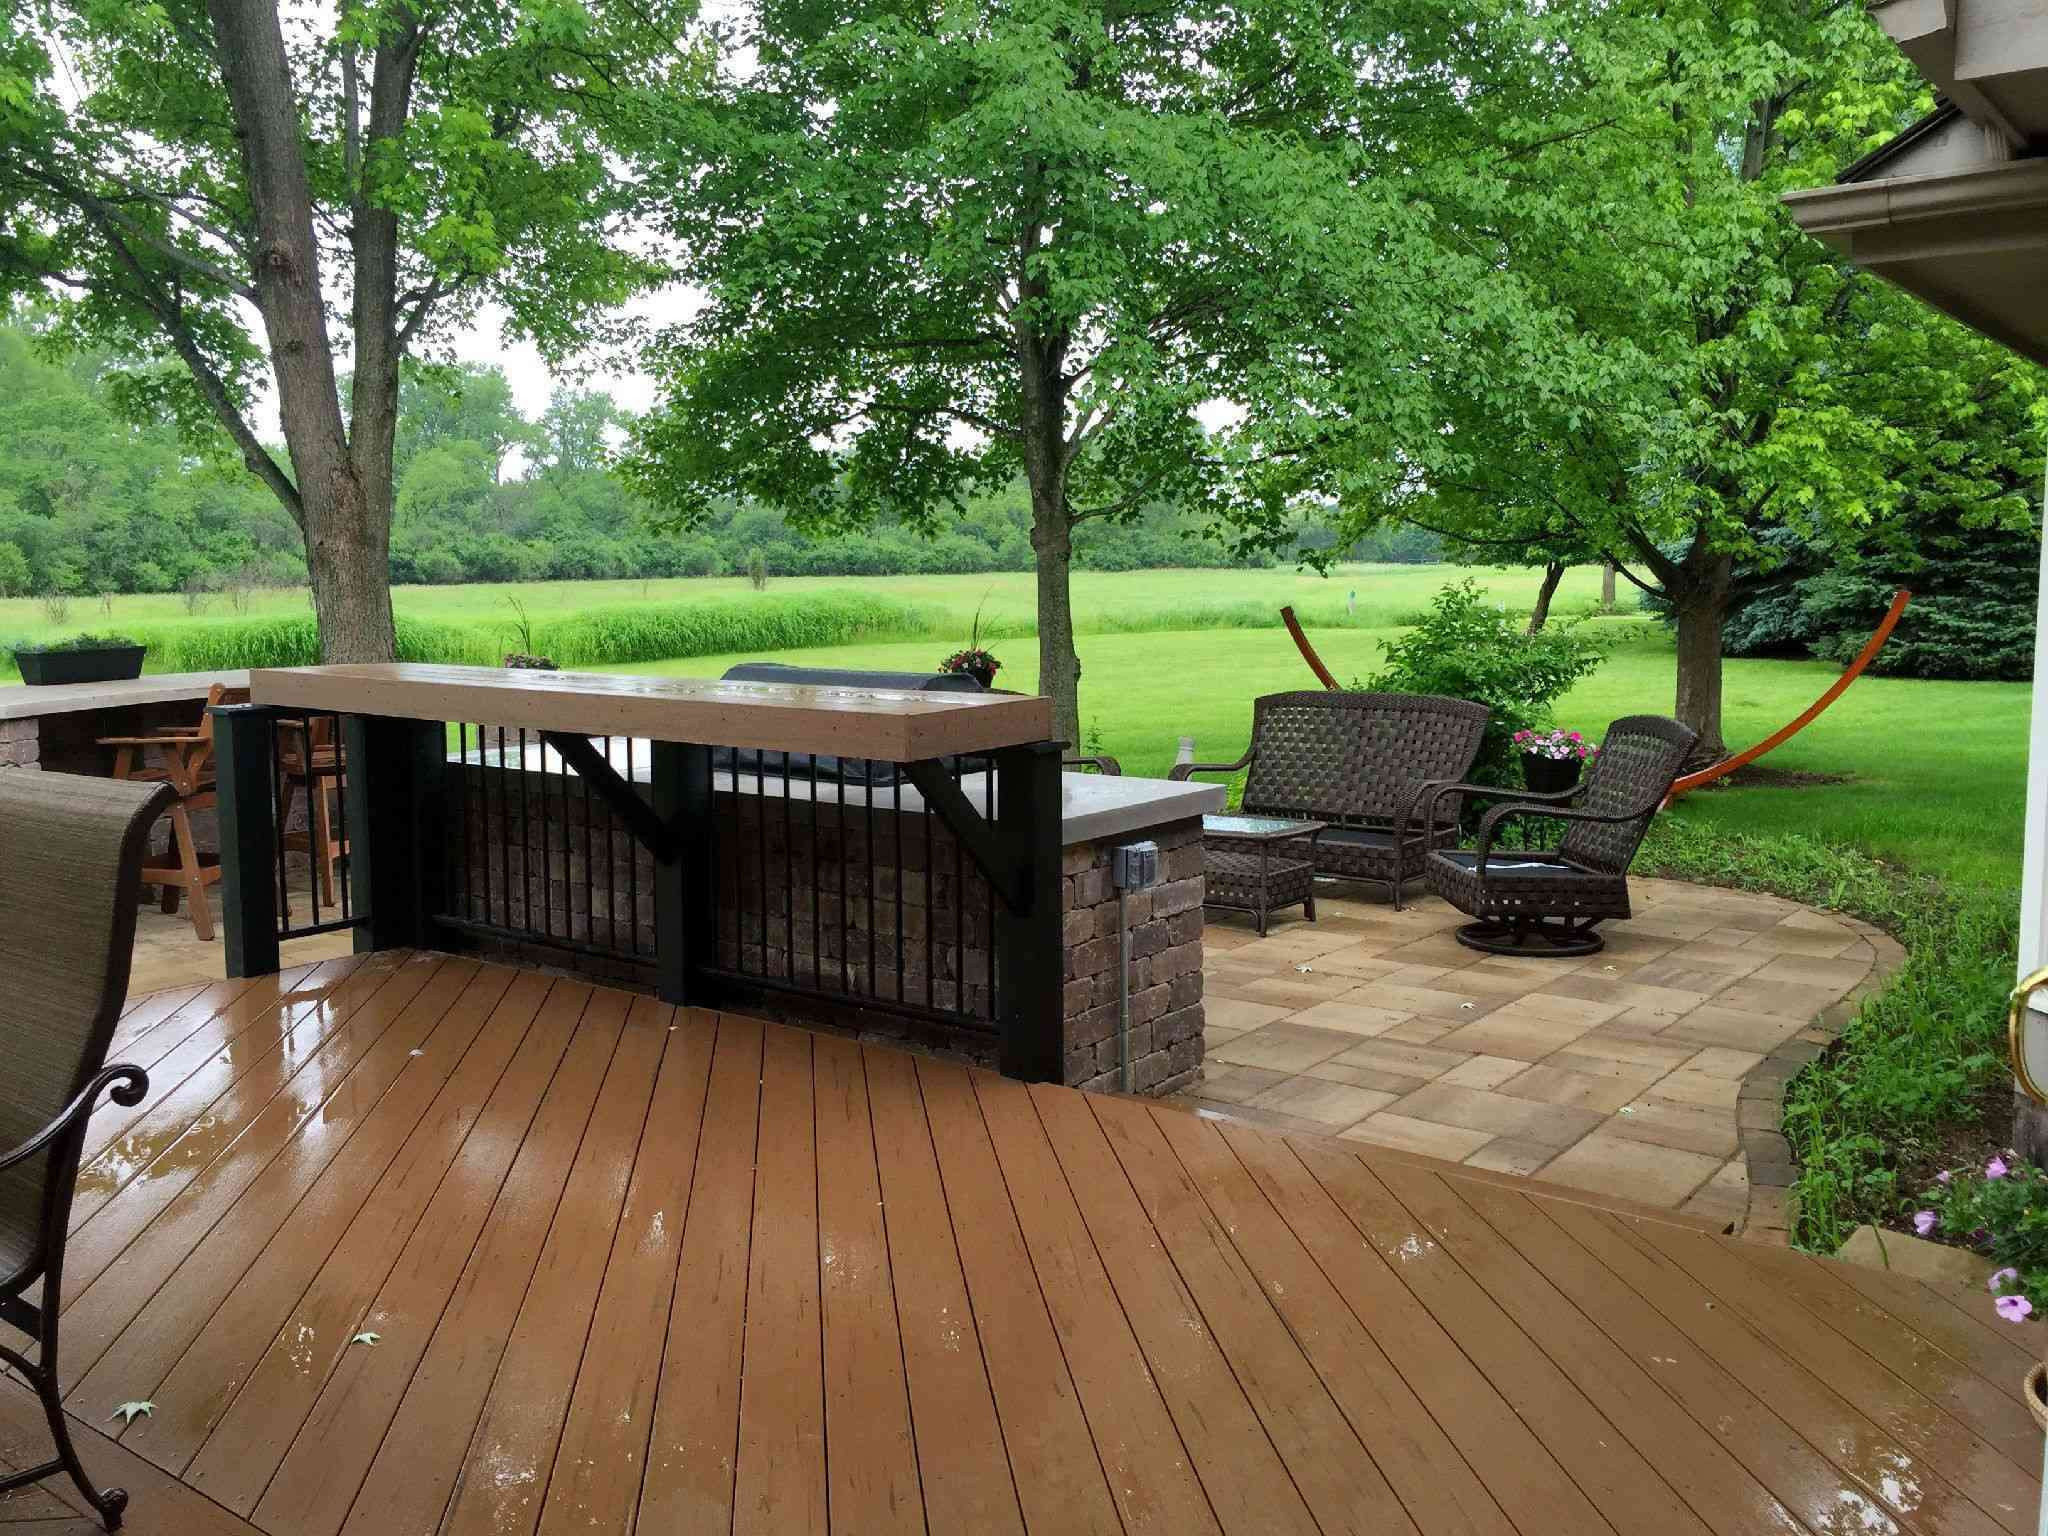 15 Best Can I Stain Hardwood Floors 2024 free download can i stain hardwood floors of wood stain ideas elegant cheap deck ideas elegant home patio lovely throughout wood stain ideas elegant cheap deck ideas elegant home patio lovely patio deckin